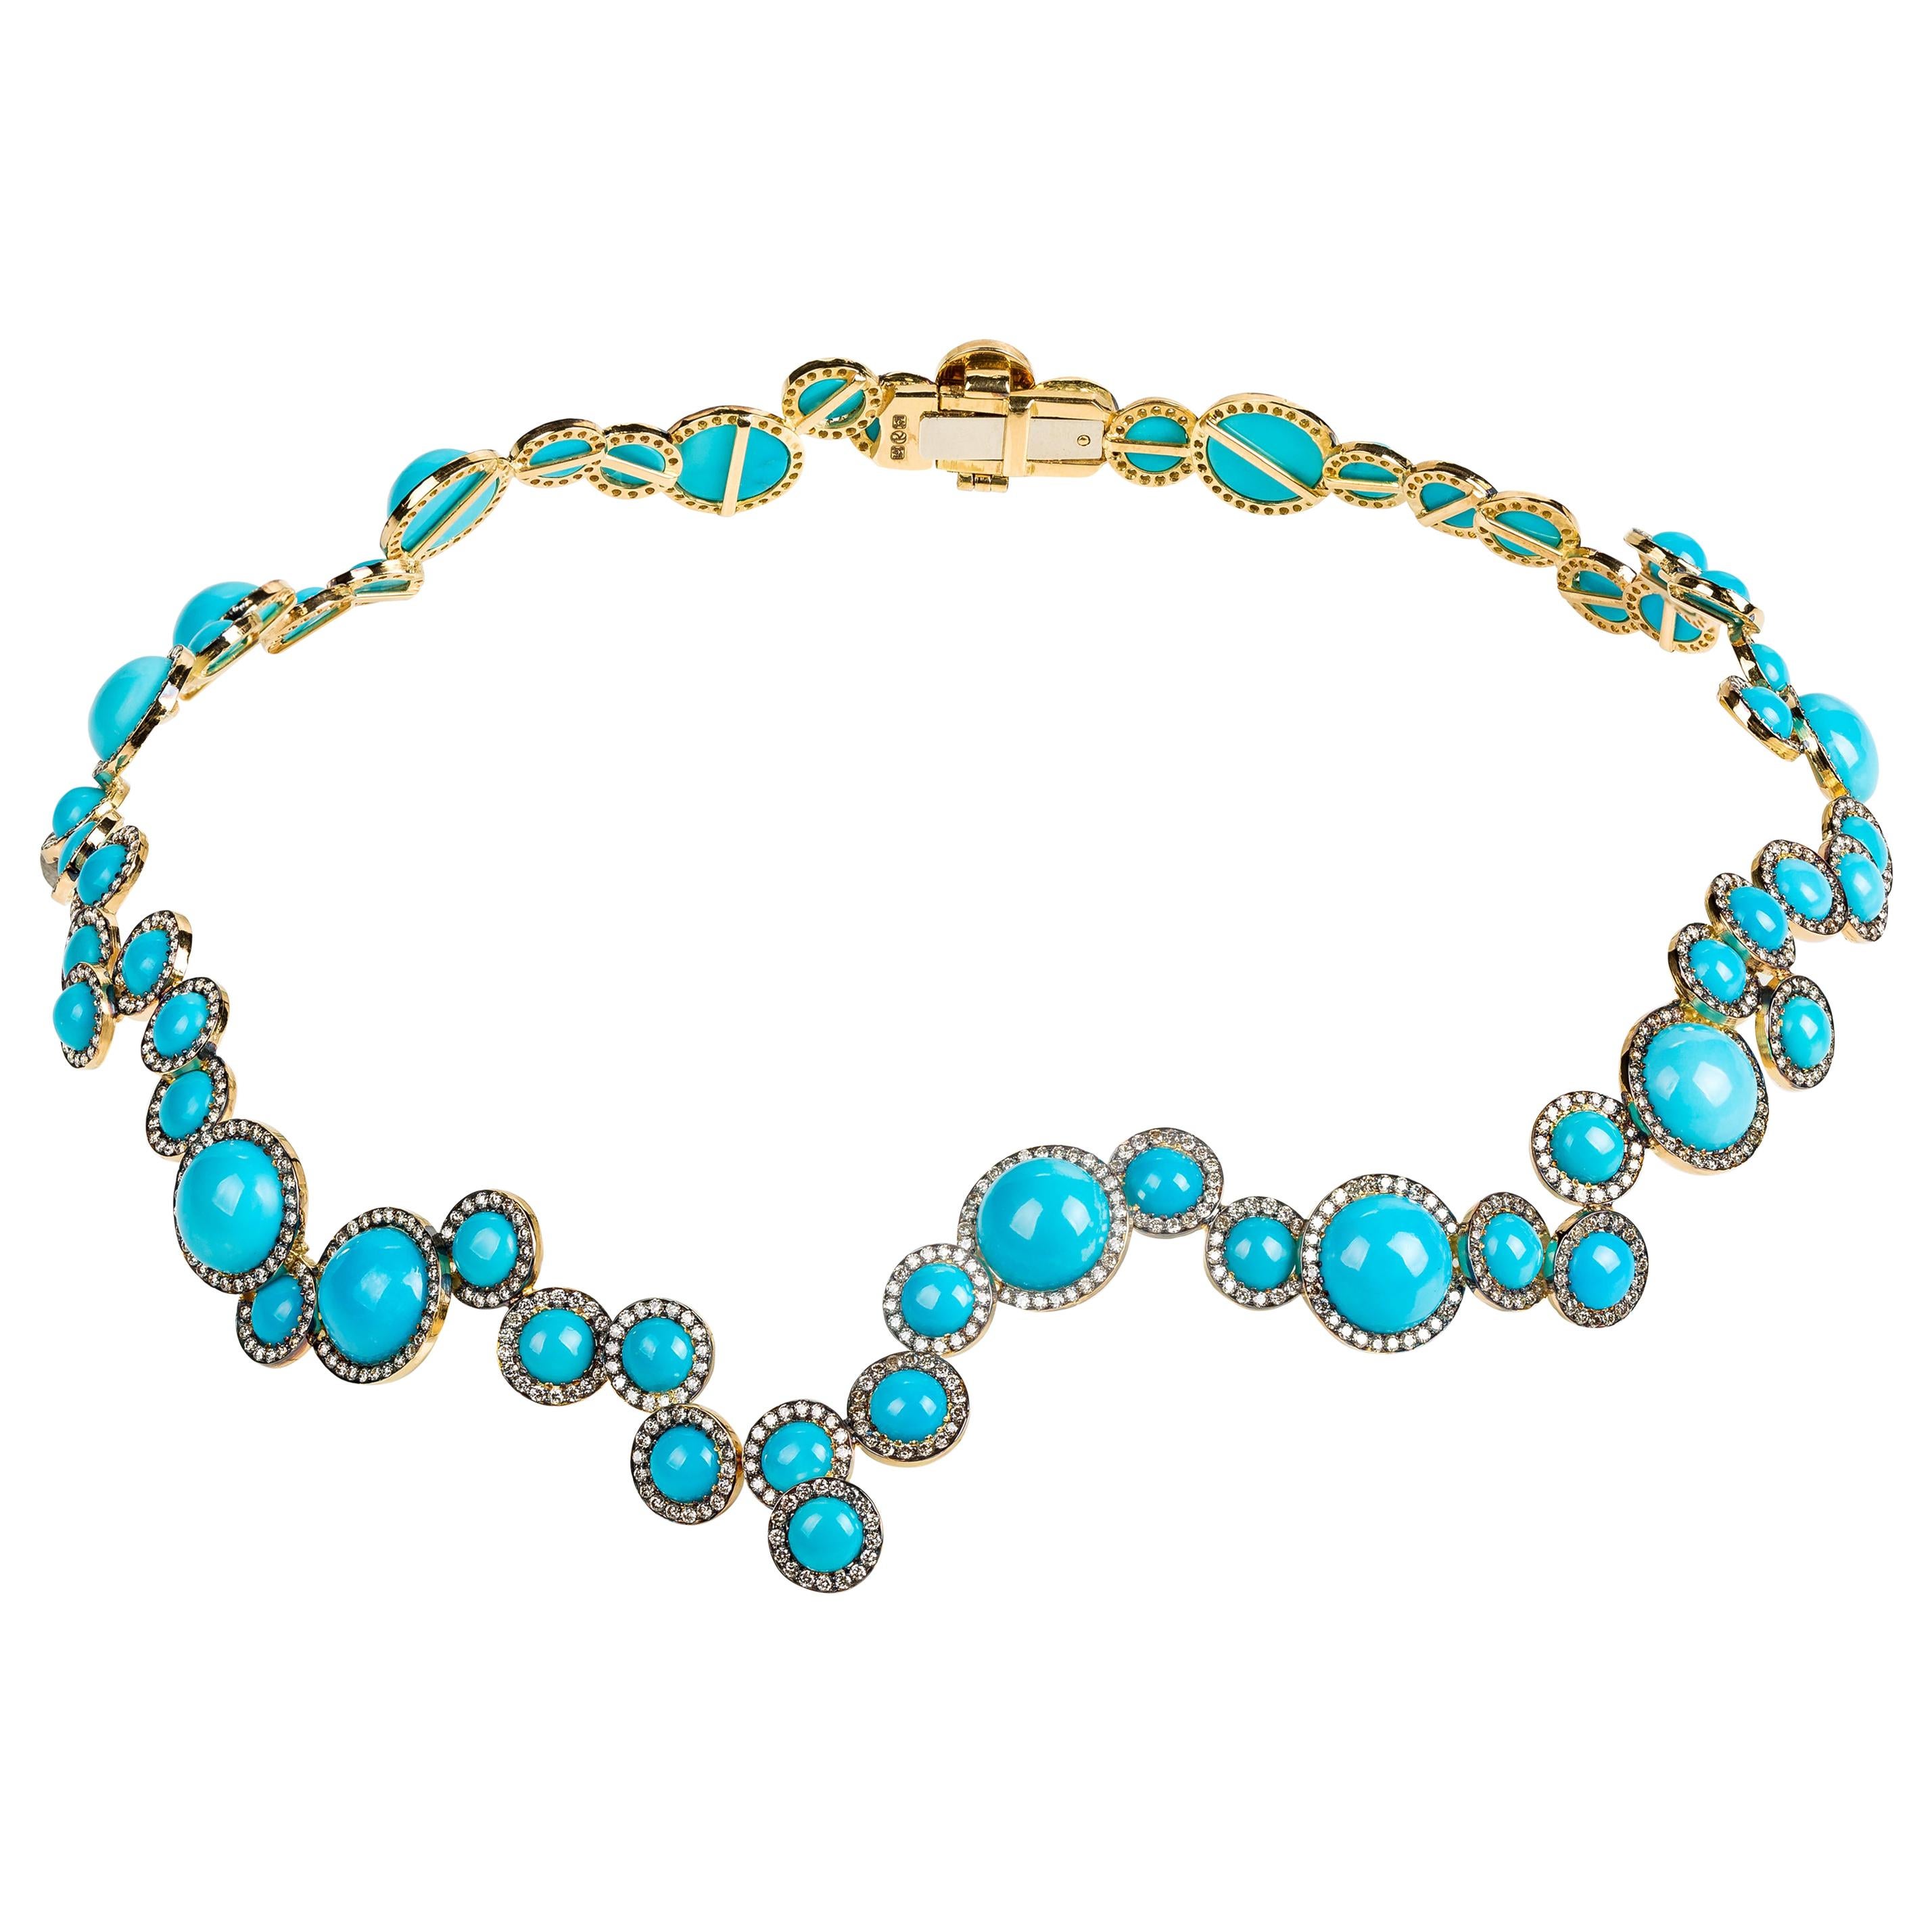 Rosior one-off Turquoise and Diamond "Choker" Necklace set in Yellow Gold